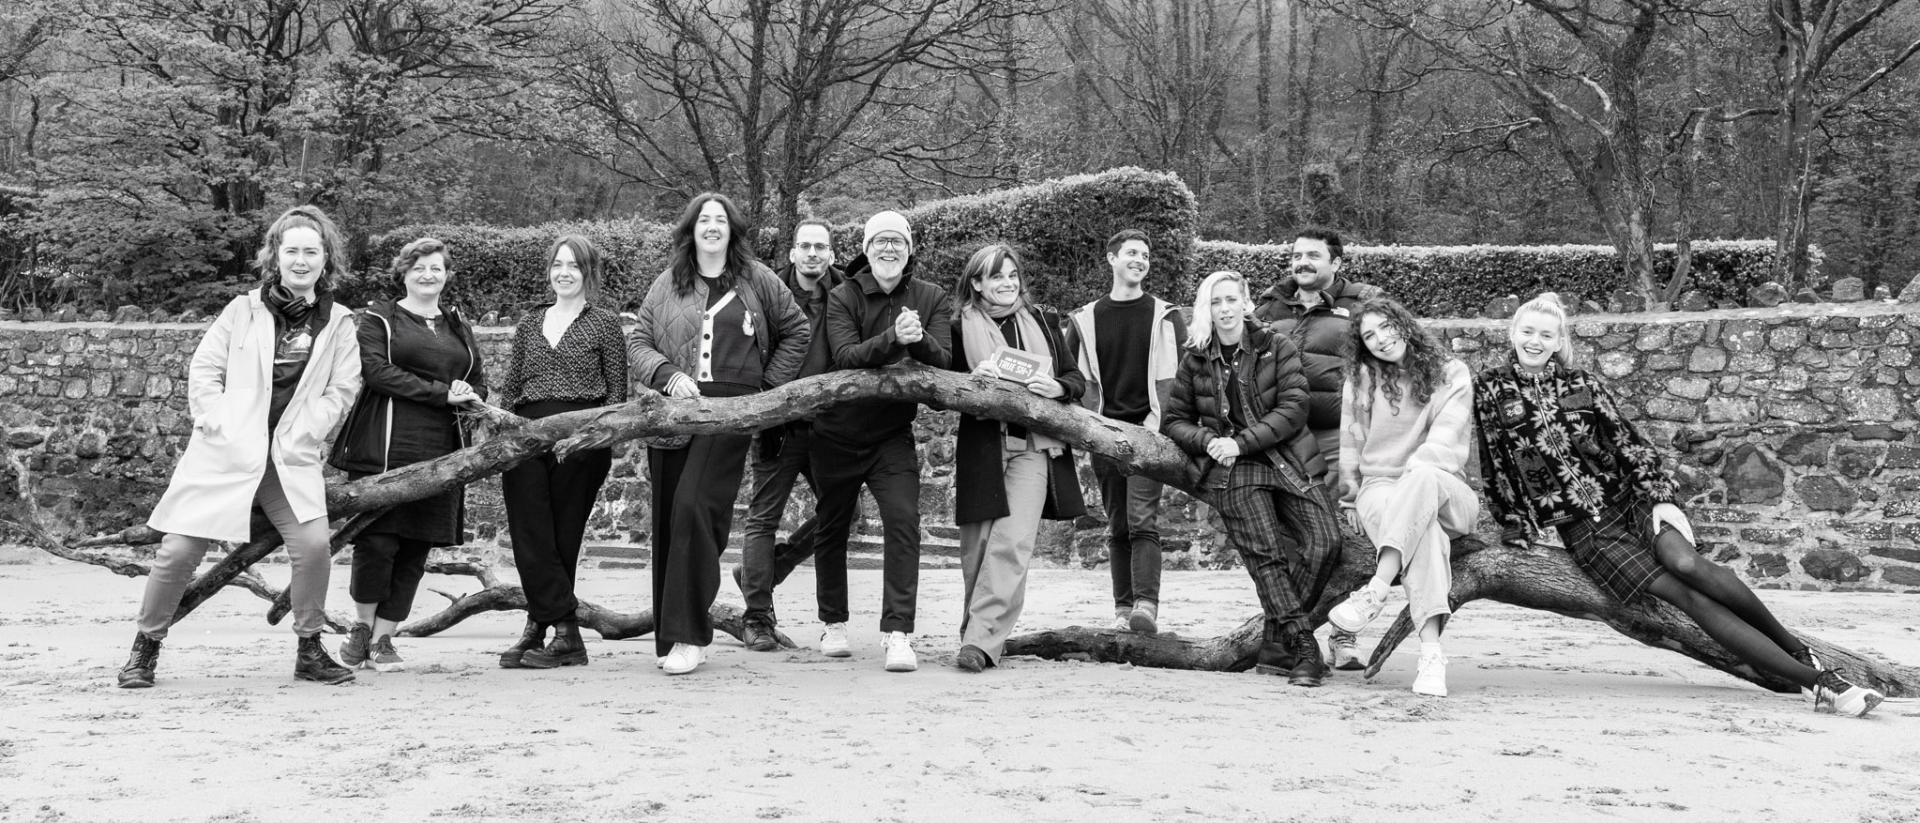 black ad white photo of 12 people posing on a beach by a fallen tree trunk. behind them is a low stone wall and trees